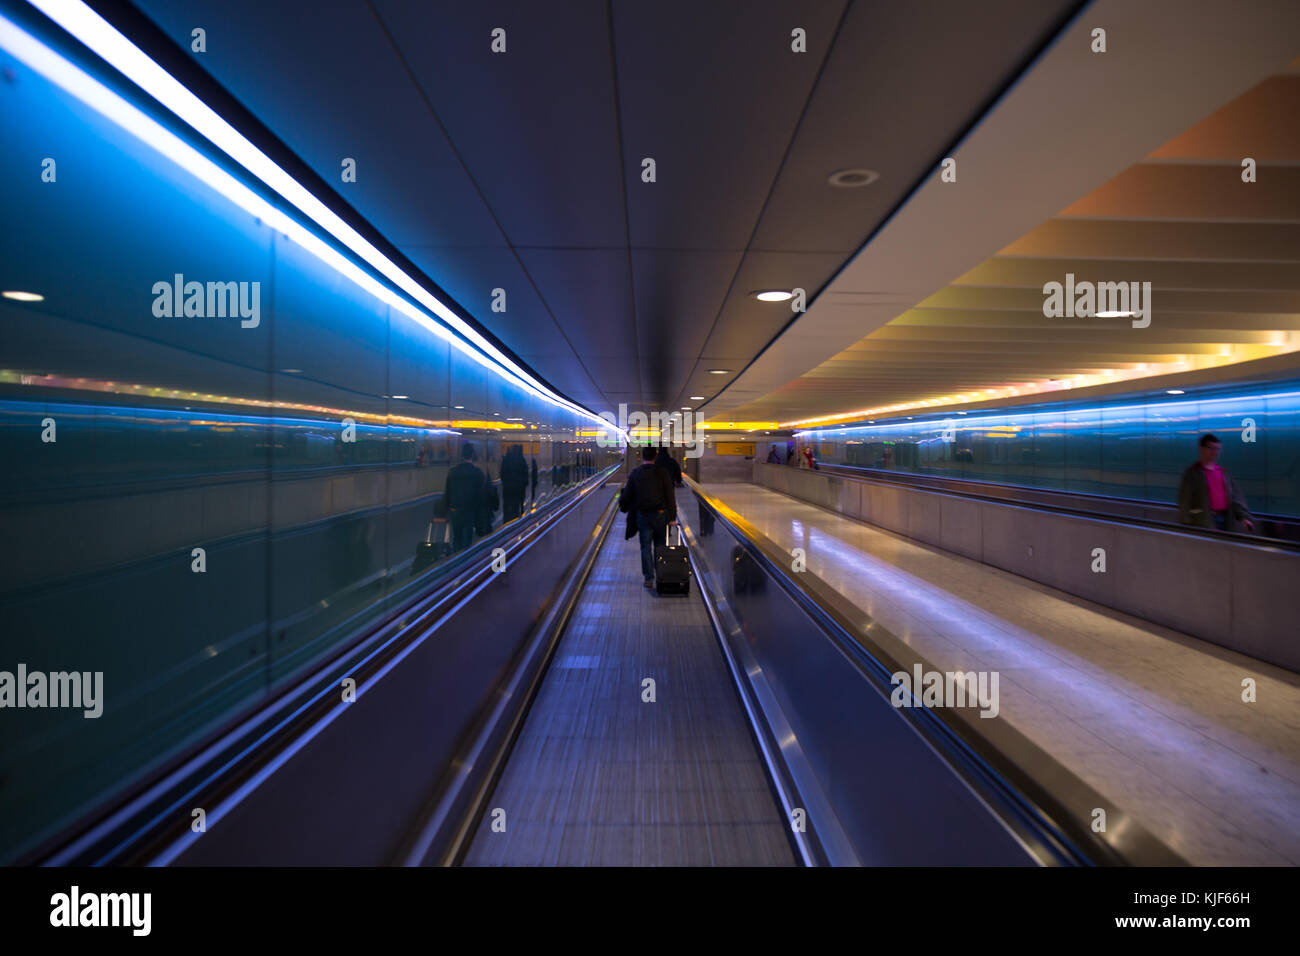 Lit moving walkway with blue and orange lights in London Heathrow Airport Stock Photo